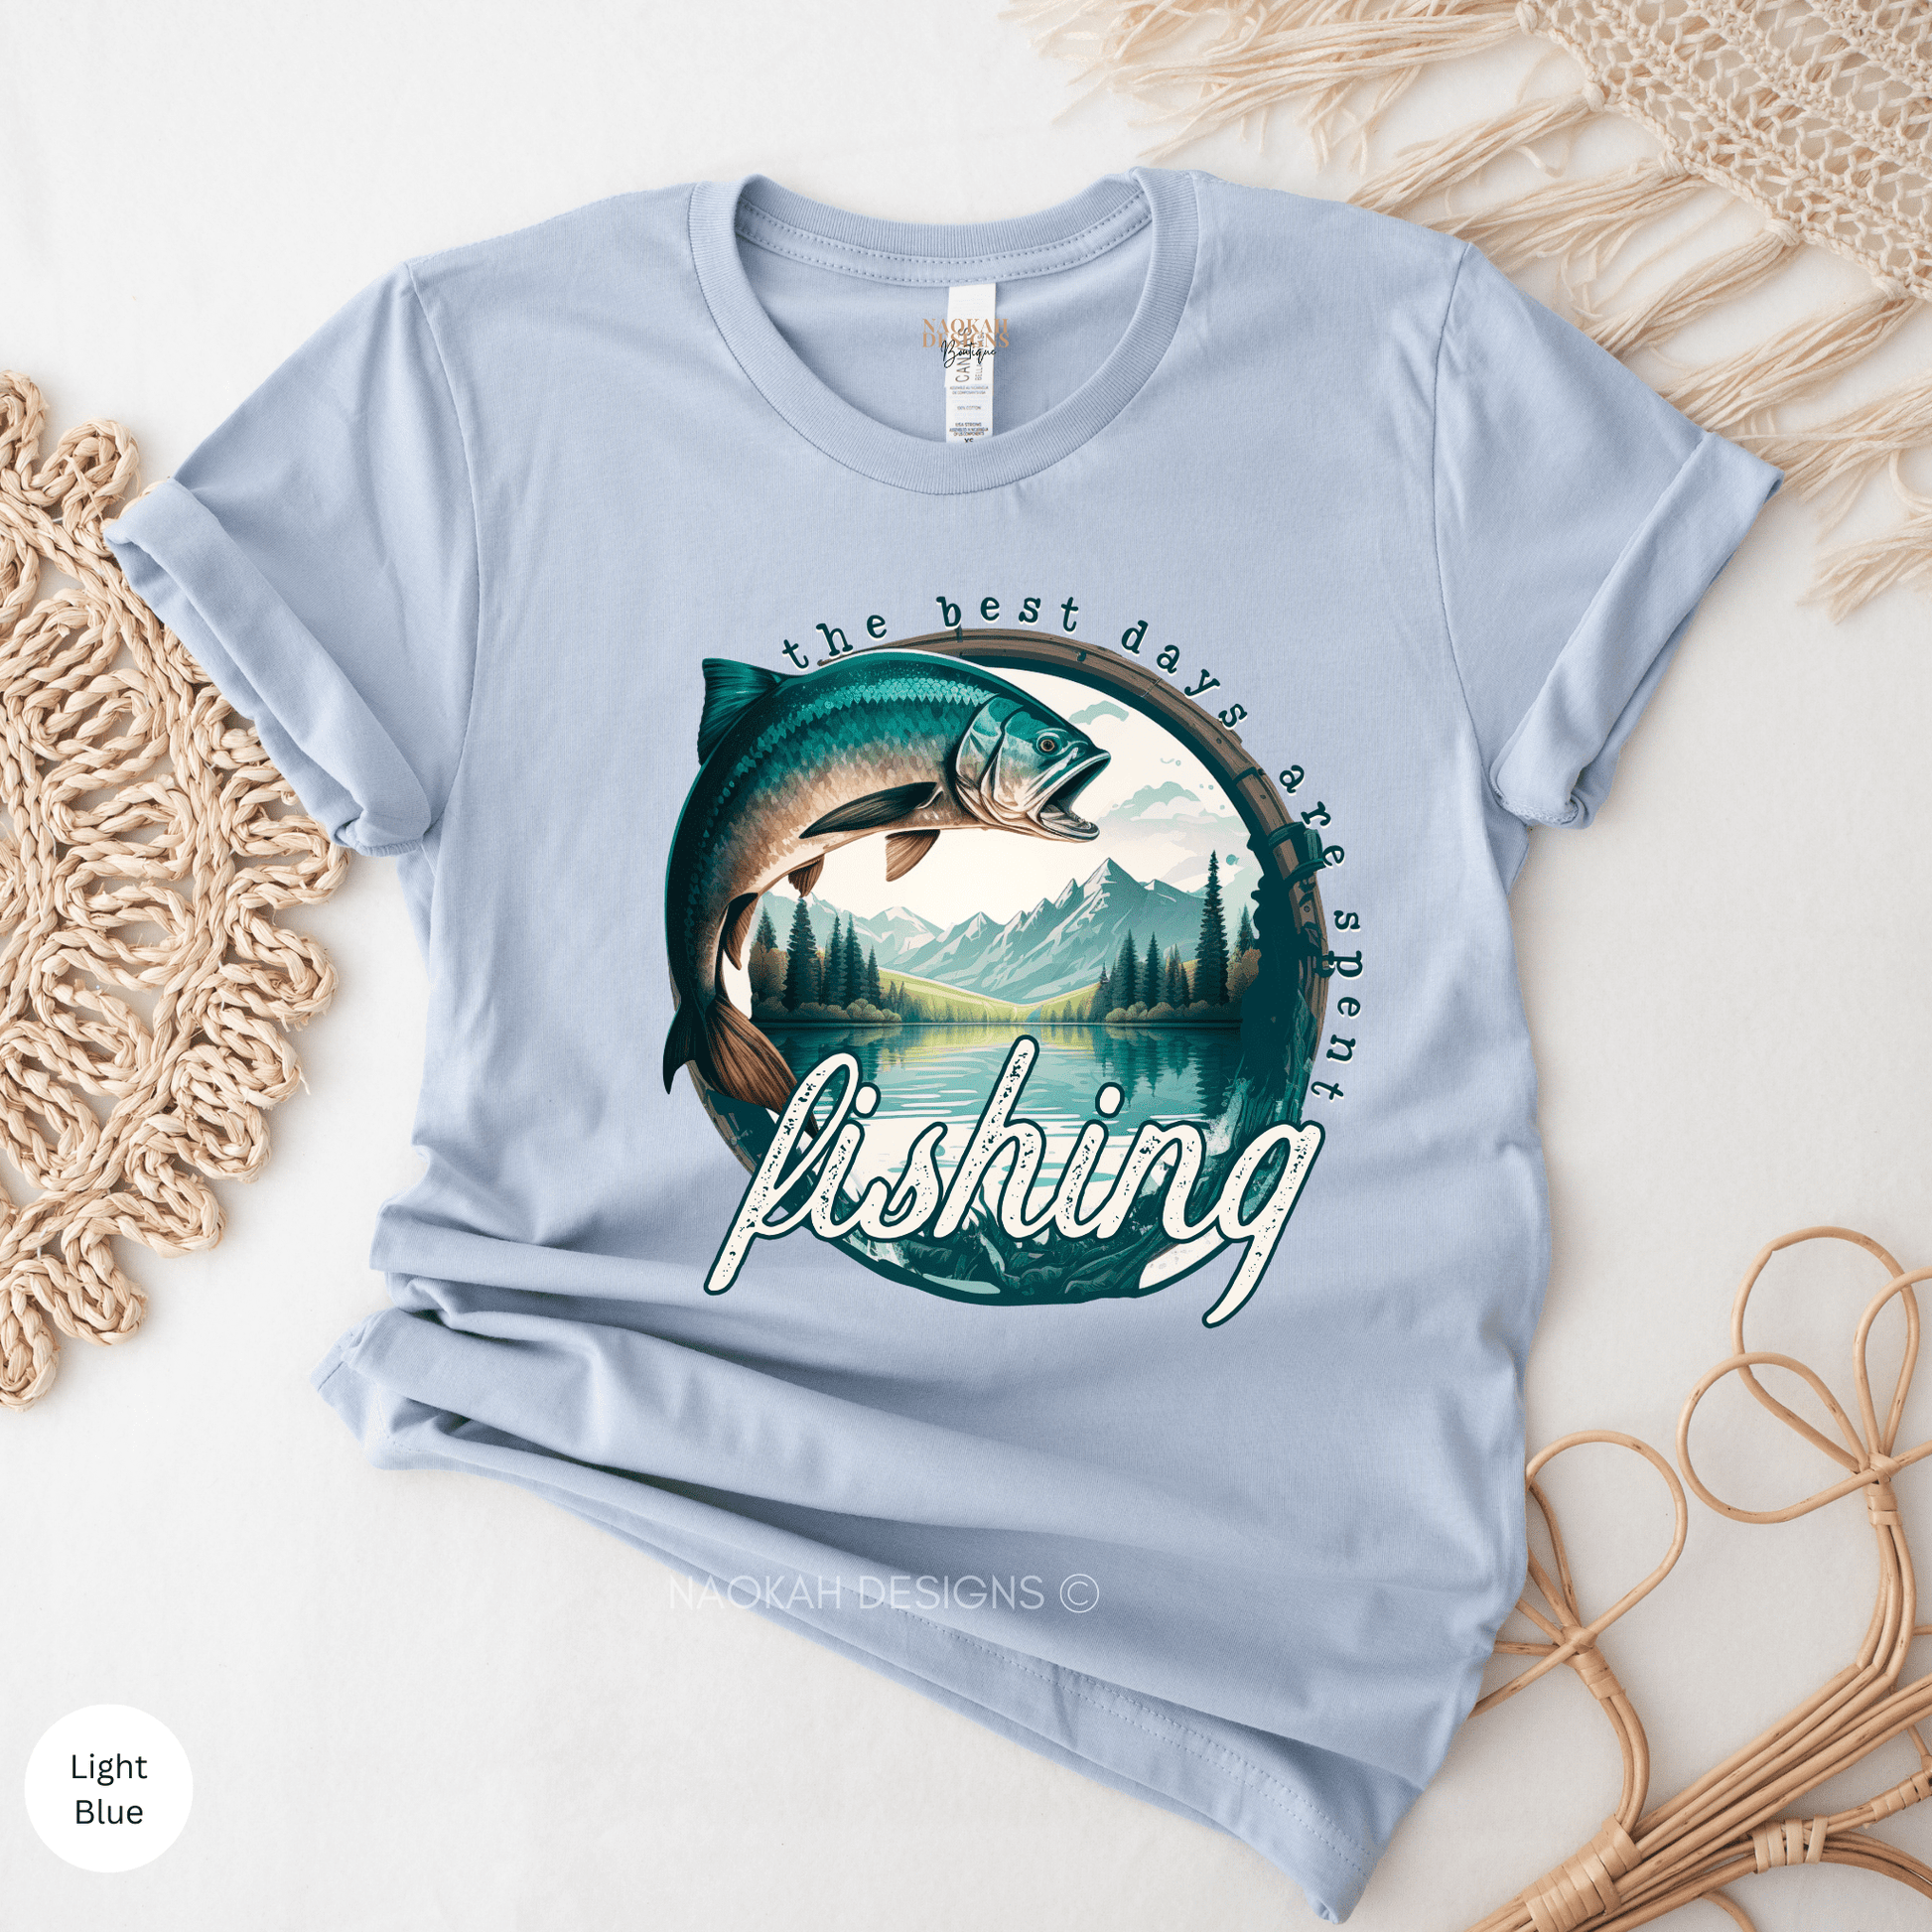 The best days are spent fishing shirt, fathers day shirt, I'll be In The Garage Shirt, Funny Shirt Men, Fathers Day Gift, Dad shirt, Mechanic funny Tee, Husband Gift, Garage TShirt, outdoor mens shirt, fishing shirt, love fishing shirt